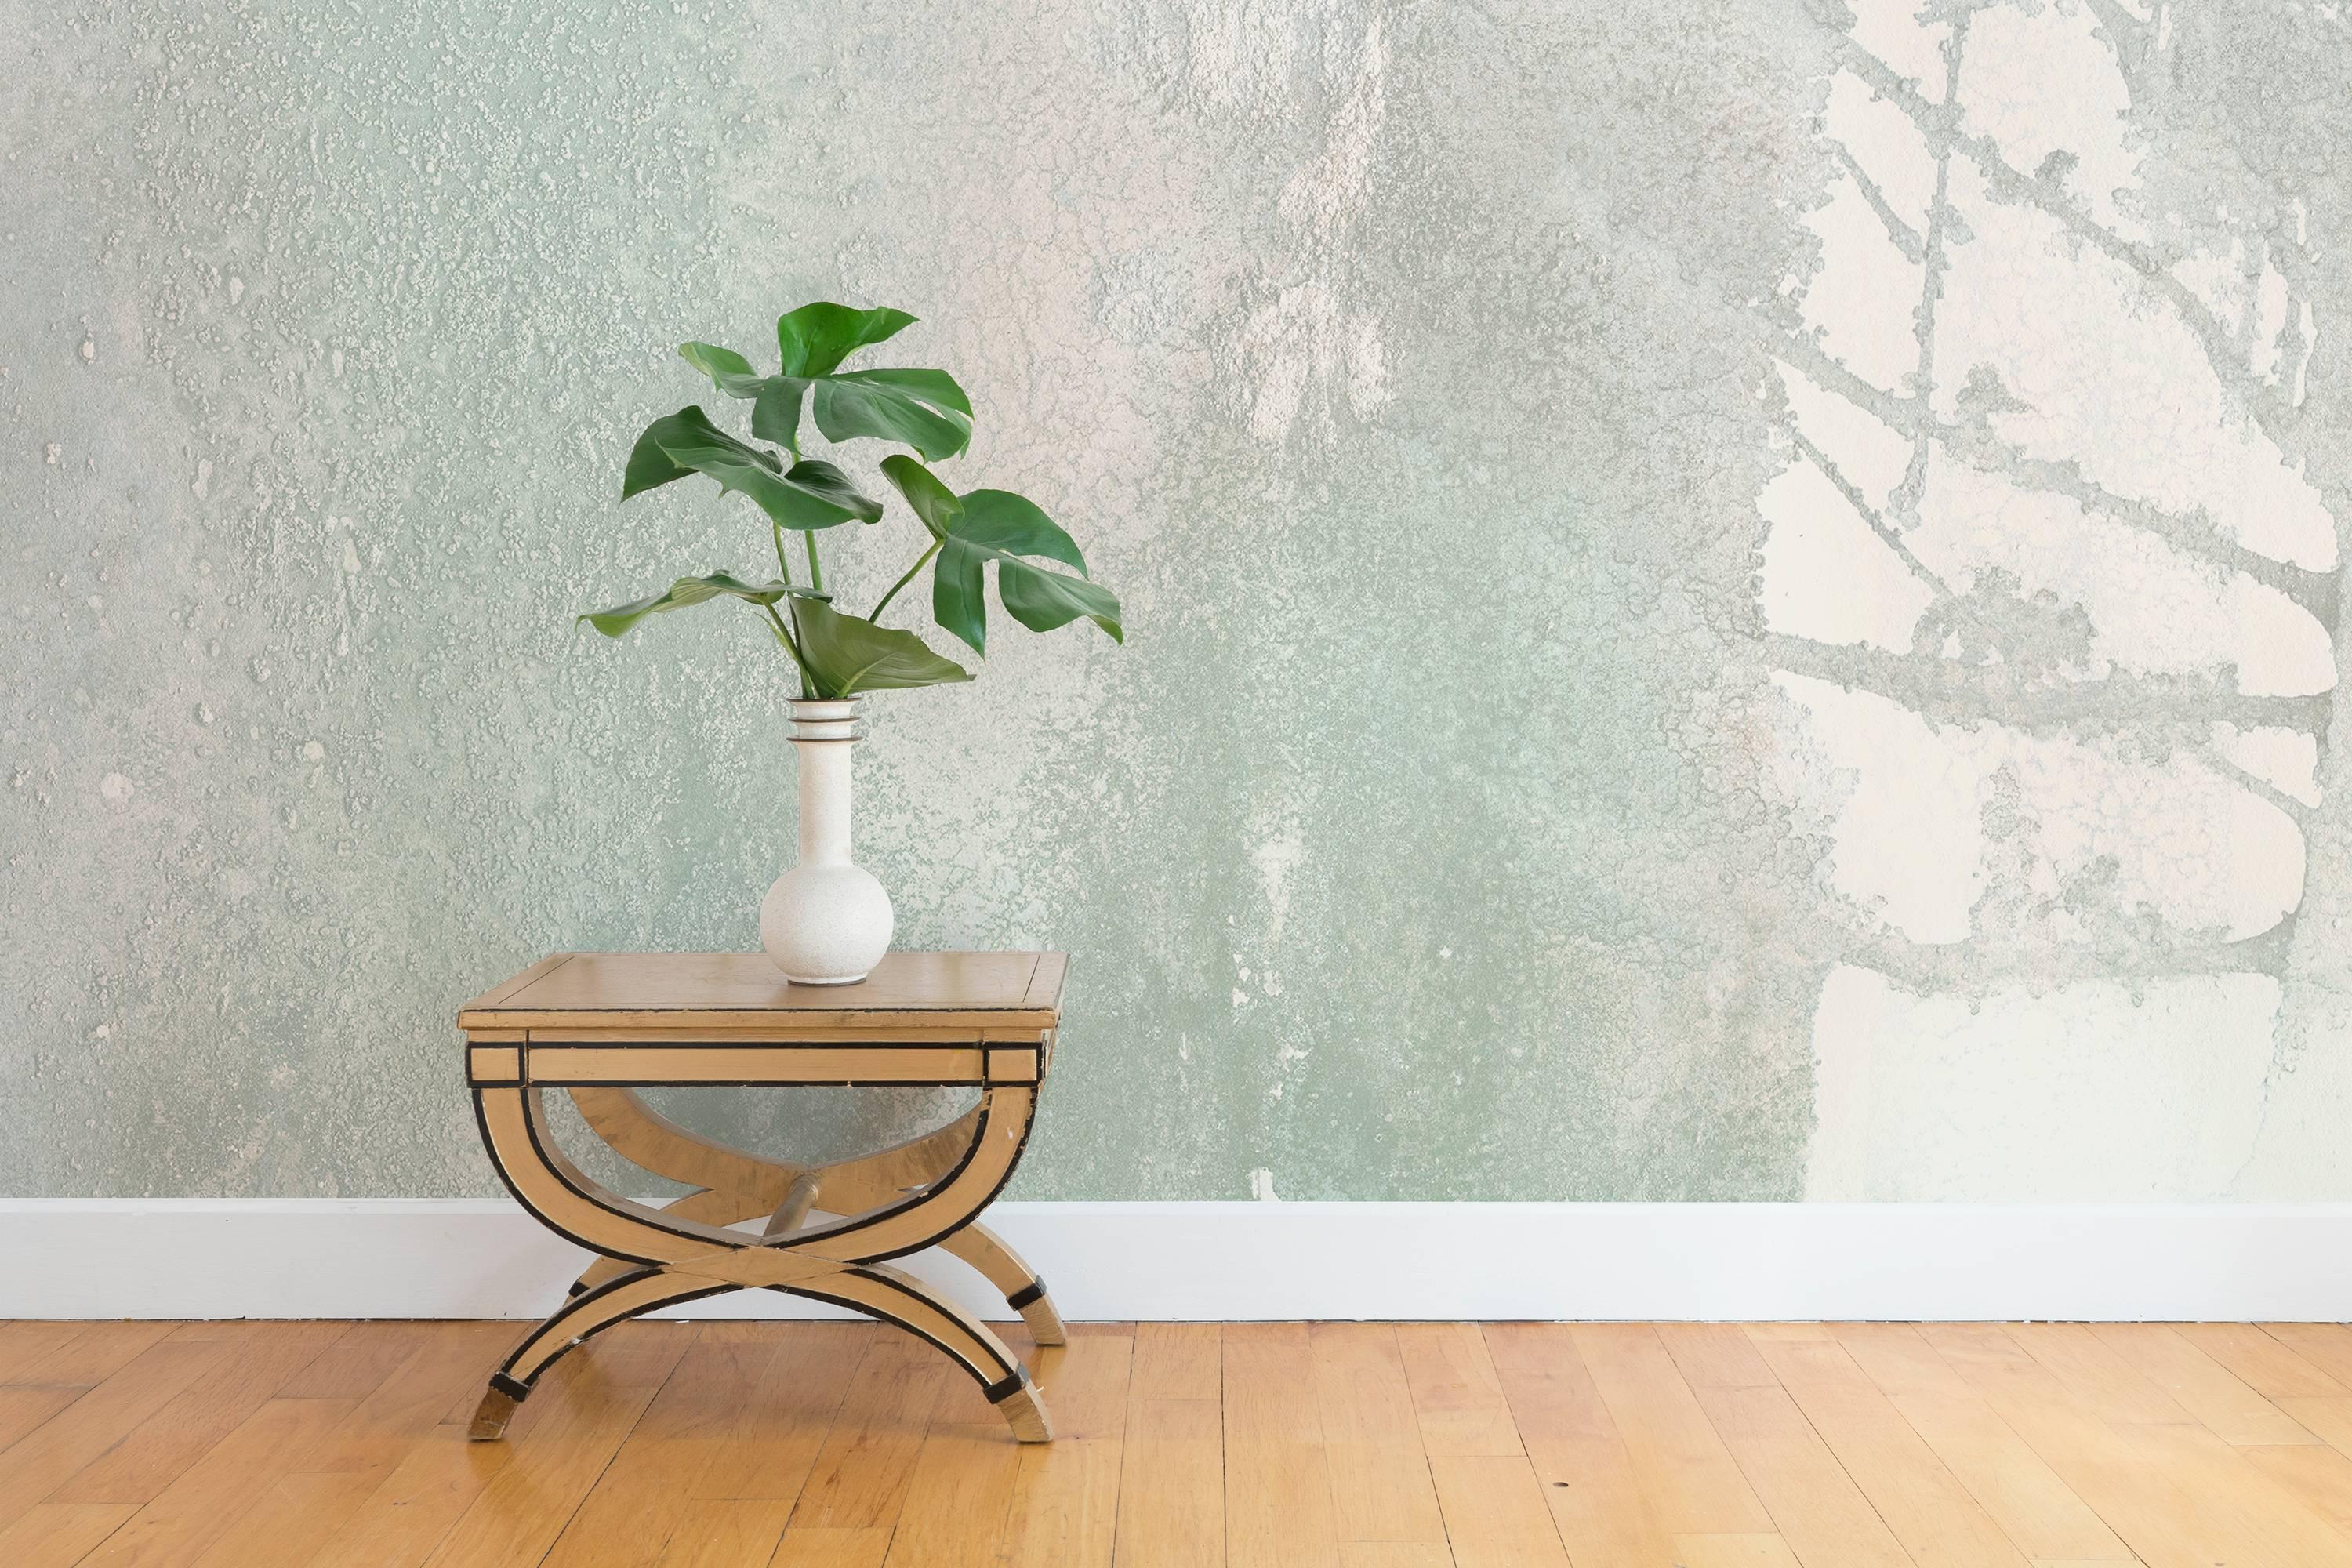 All of our wallpapers are priced by the square foot and are non-repeating custom murals. As a result, each order is laid out and printed to fit the exact dimensions of your wall. The Oceania Collection is printed on a commercial grade matte